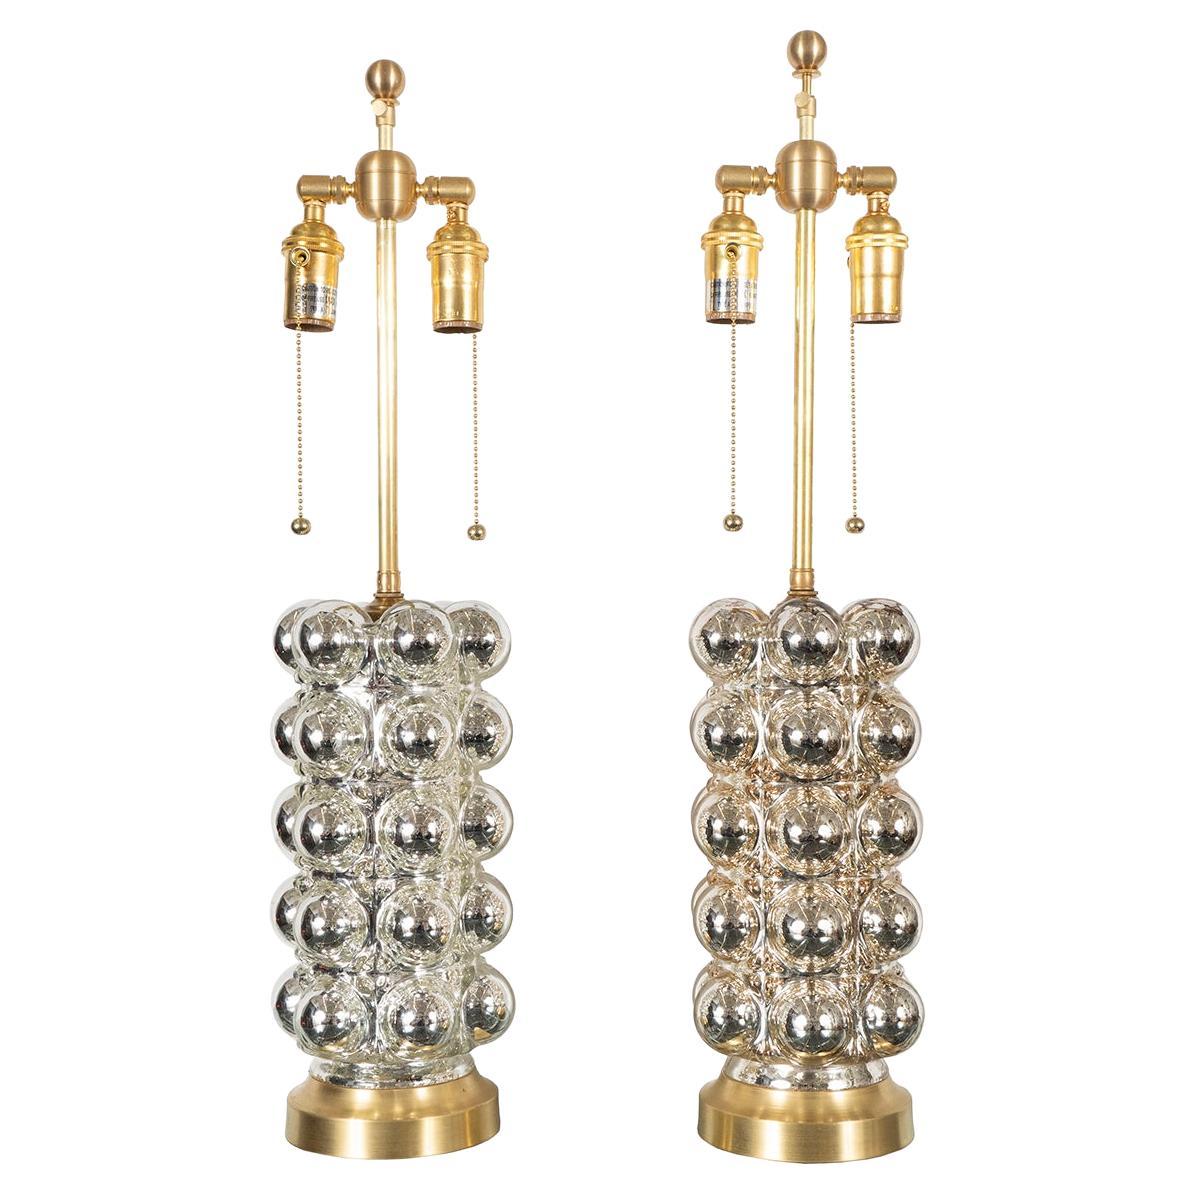 Pair of Cylindrical Bubble Mercury Glass Lamps